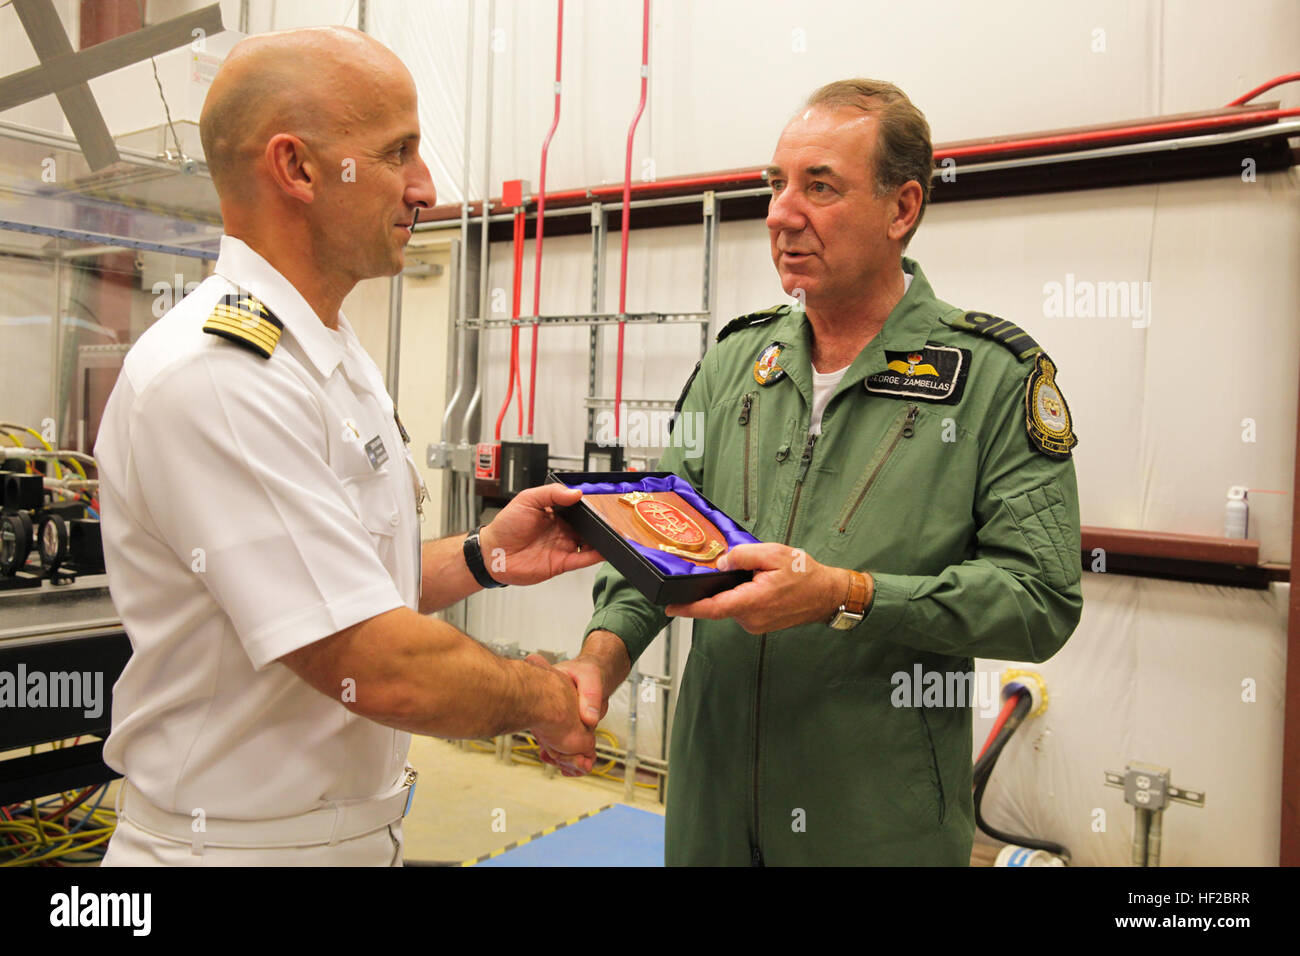 The First Sea Lord and Chief of Naval Staff of the British Royal Navy, Adm. Sir George Zambellas, right, presents a gift to a U.S. Navy captain during a visit at Naval Surface Warfare Center at Dahlgren, Va., July 29, 2014. Zambellas is taking part in the Commandant of the Marine Corps' Counterpart Program, which invites foreign military leaders to visit the United States and interact with U.S. military leaders. (U.S. Marine Corps photo by Cpl. Michael C. Guinto/Released) First Sea Lord Counterpart Visit 140729-M-LI307-459 Stock Photo